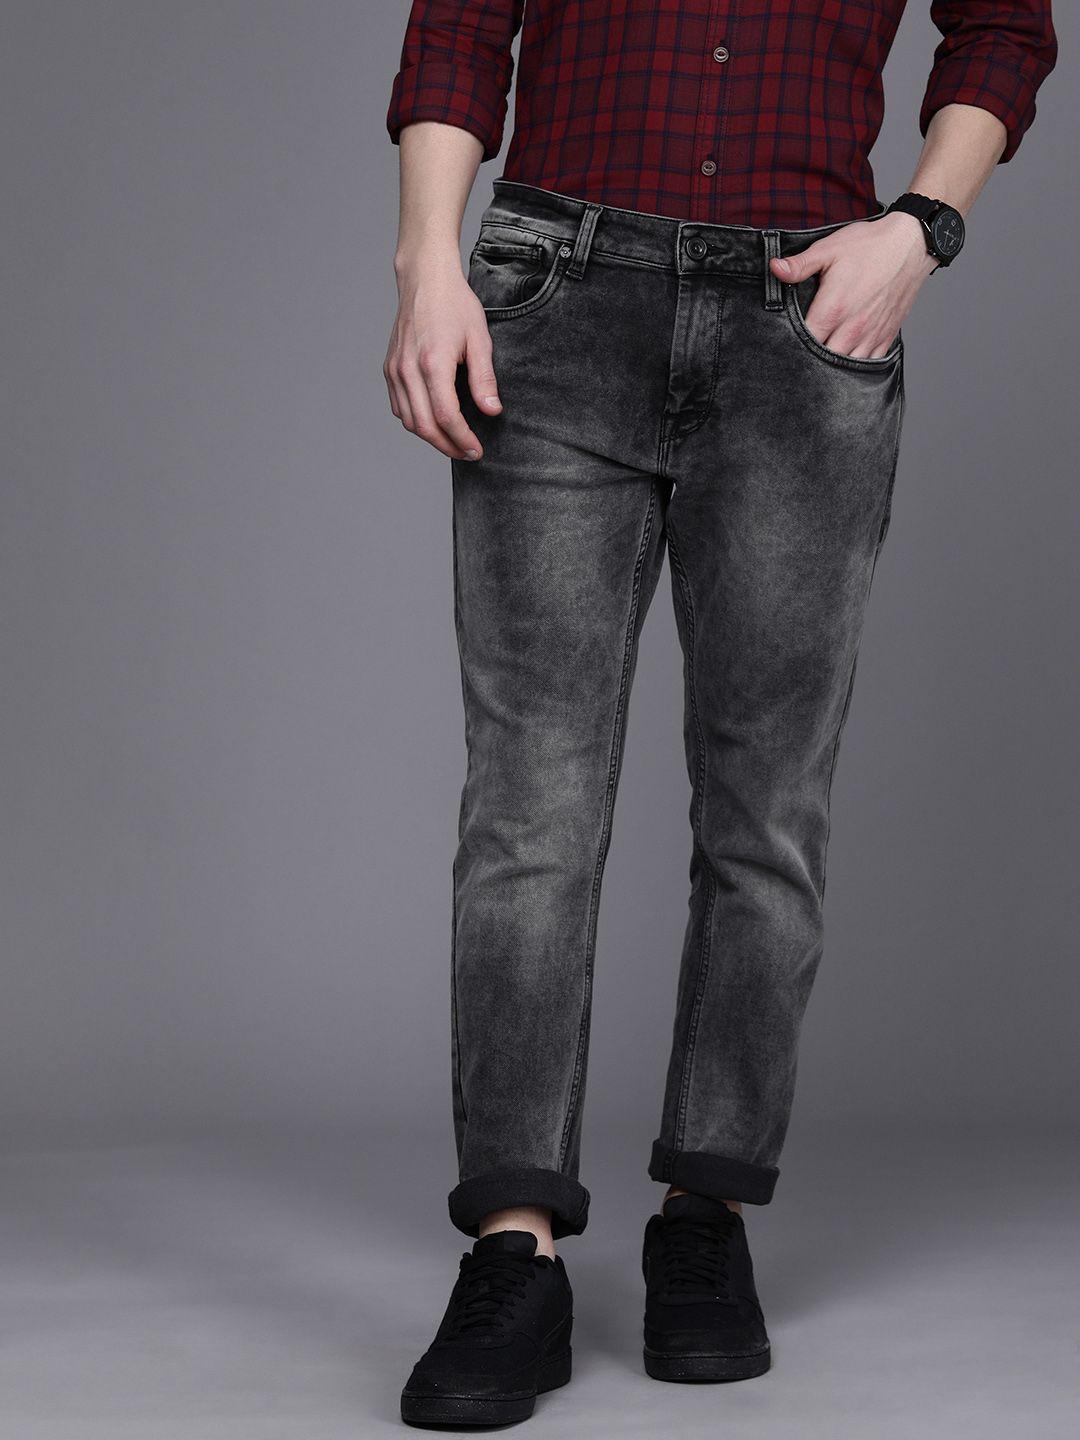 voi jeans men charcoal grey track skinny fit heavy fade acid wash stretchable jeans